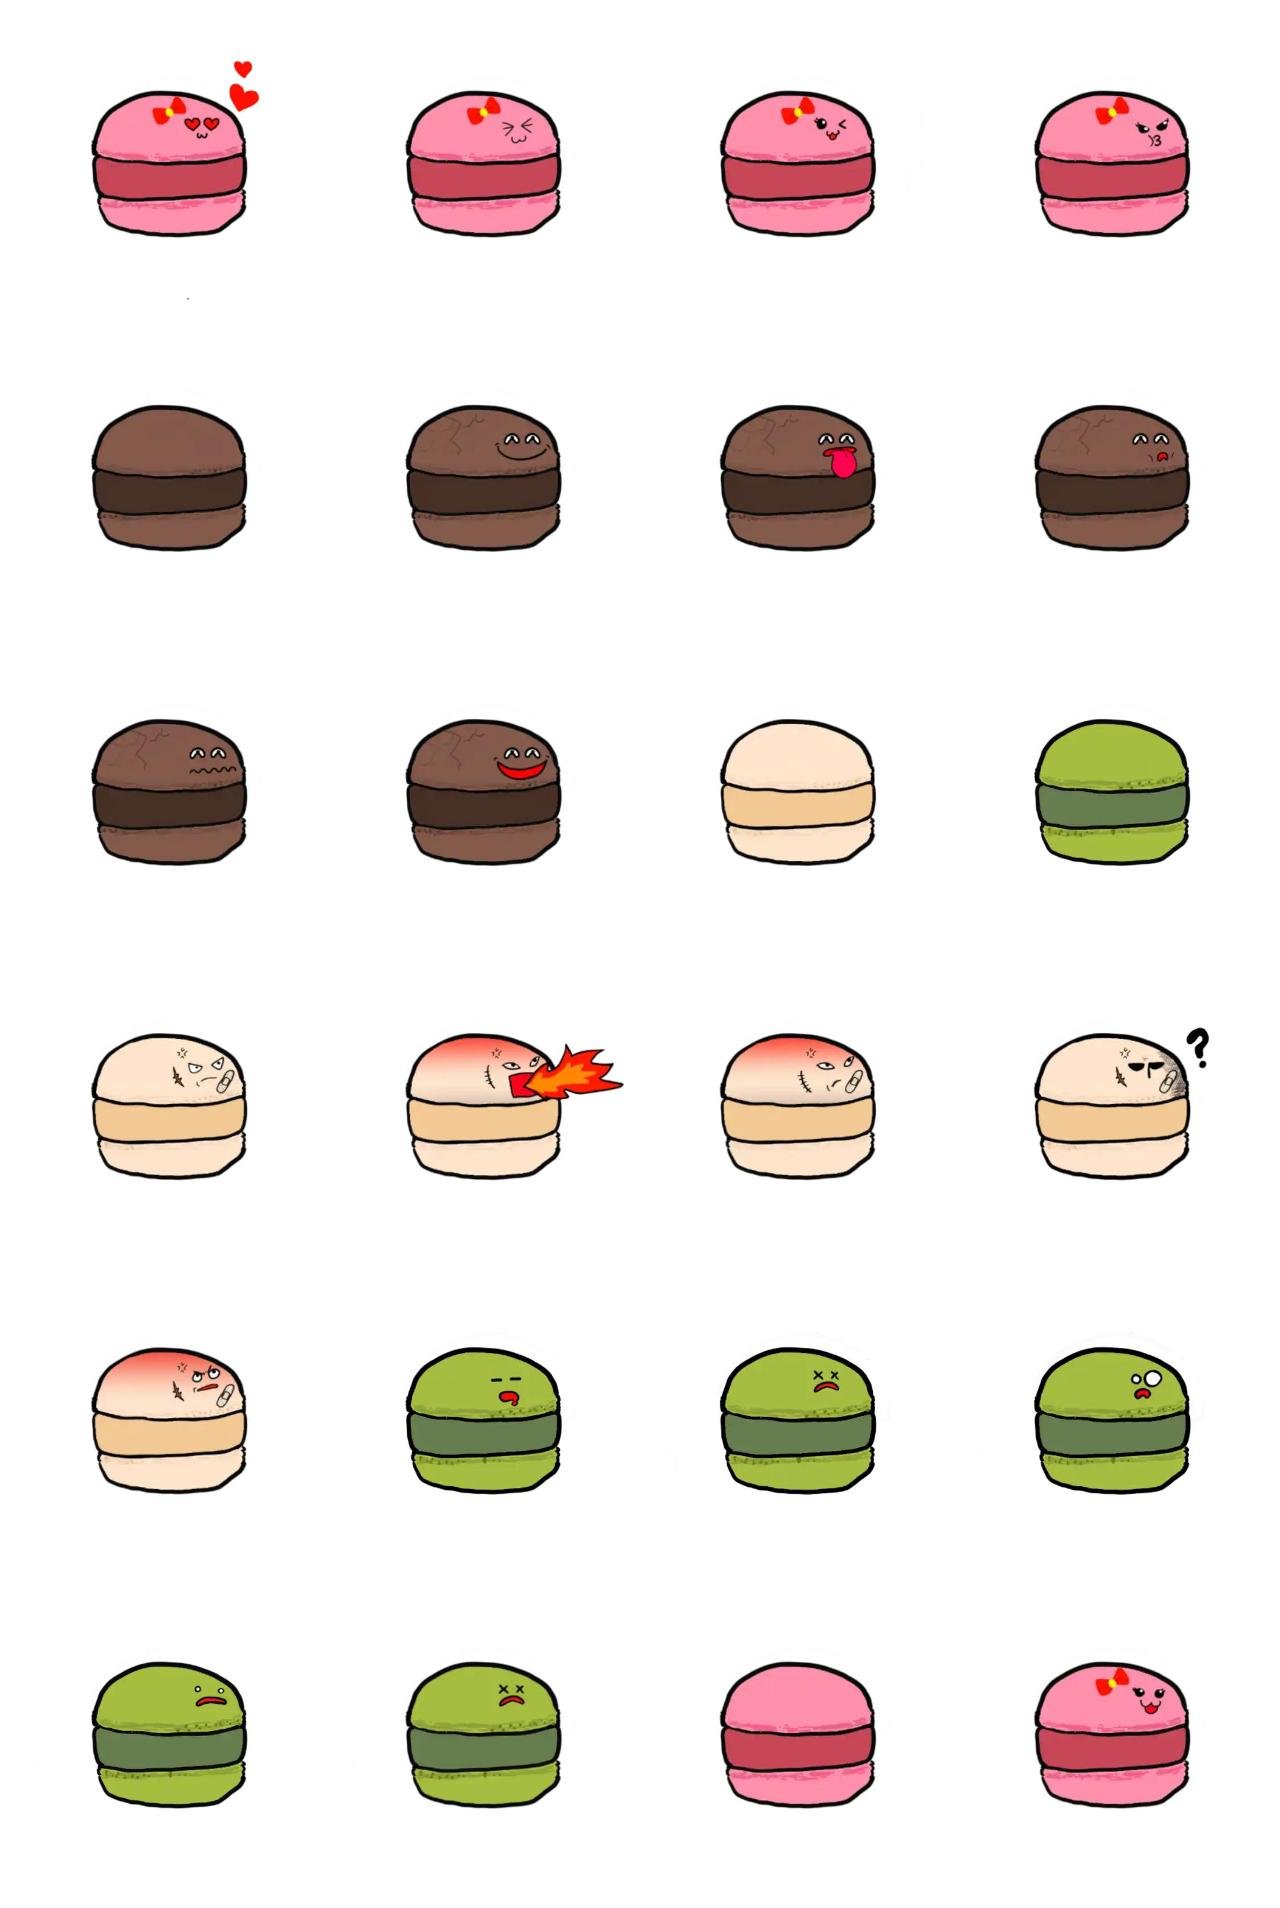 Macaron Gag,Food/Drink sticker pack for Whatsapp, Telegram, Signal, and others chatting and message apps